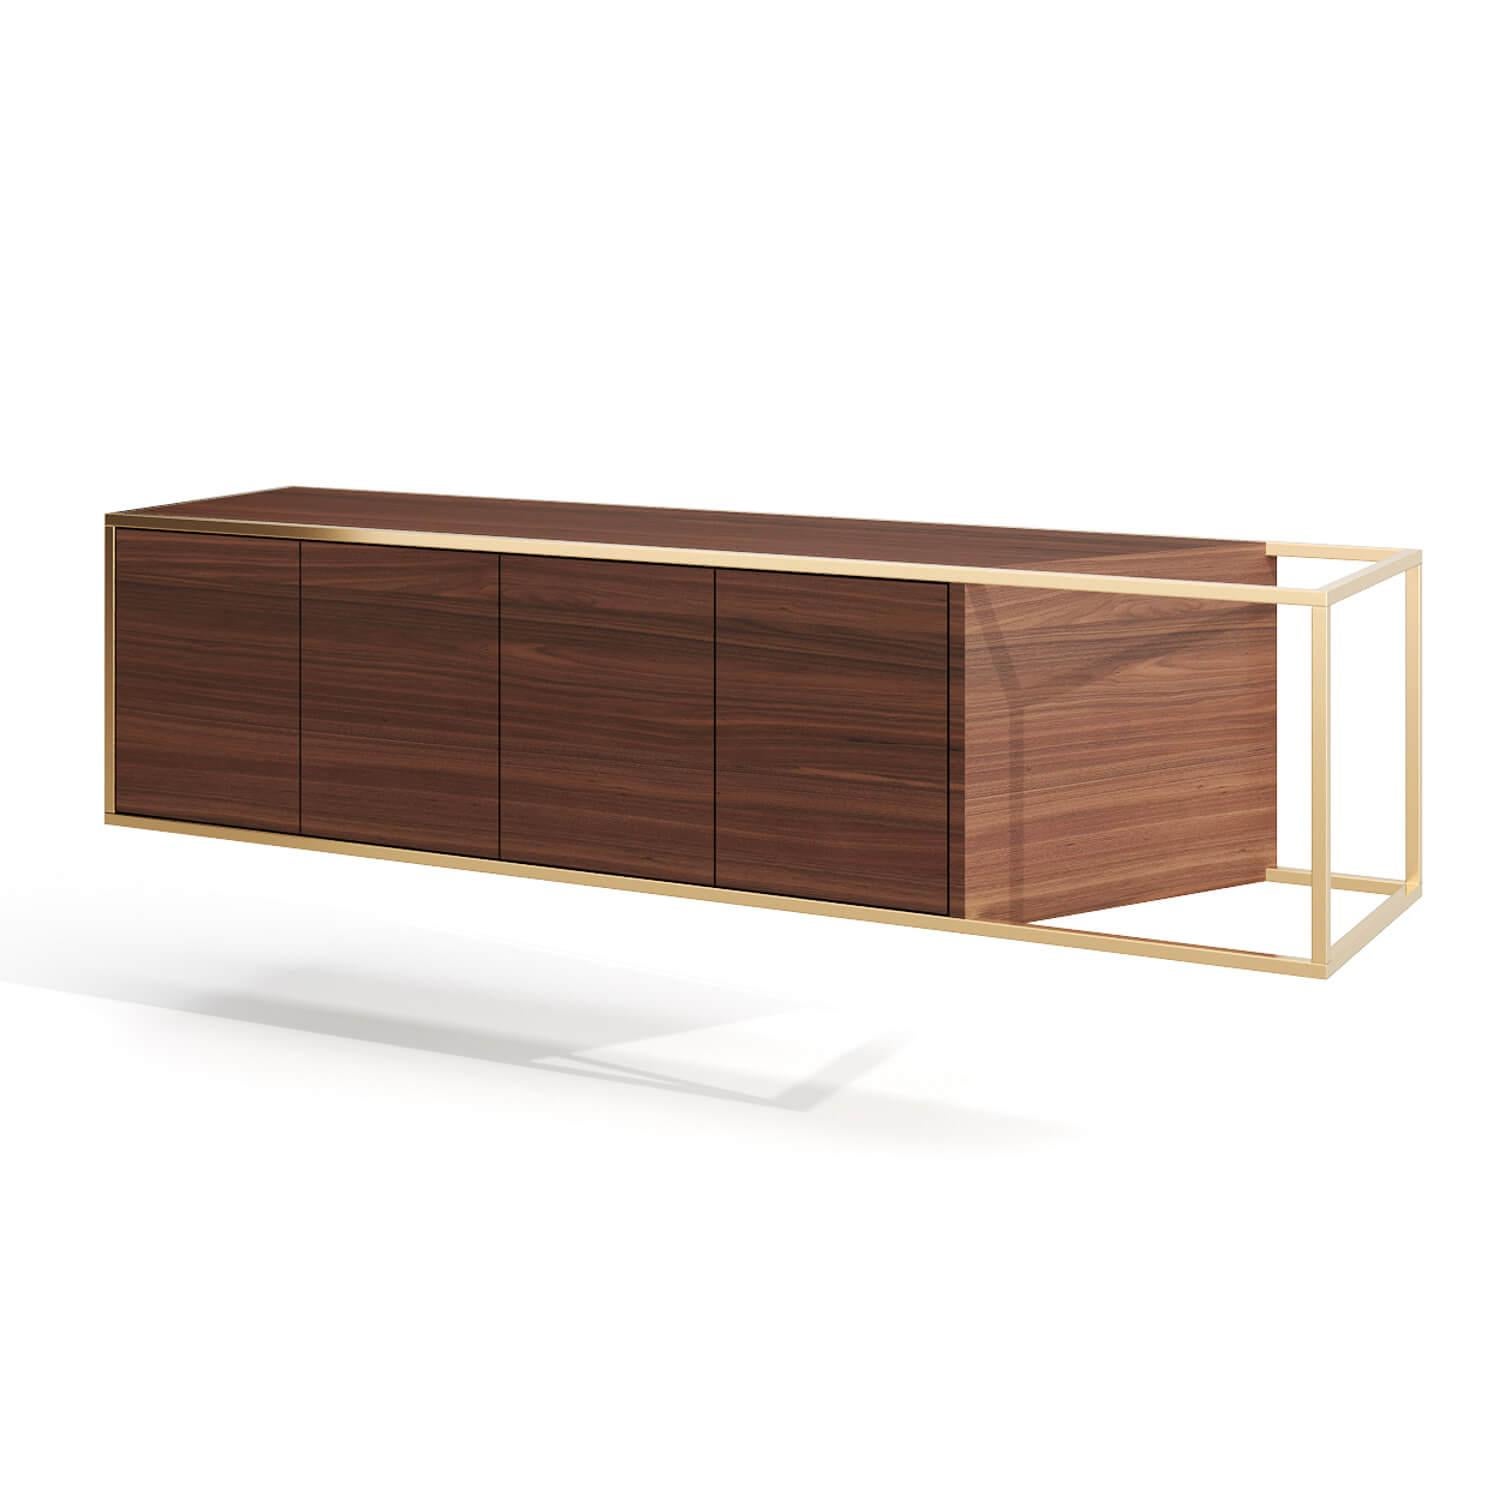 Lacquered Modern Minimalist Suspended Credenza Sideboard in Walnut Wood and Brushed Brass For Sale